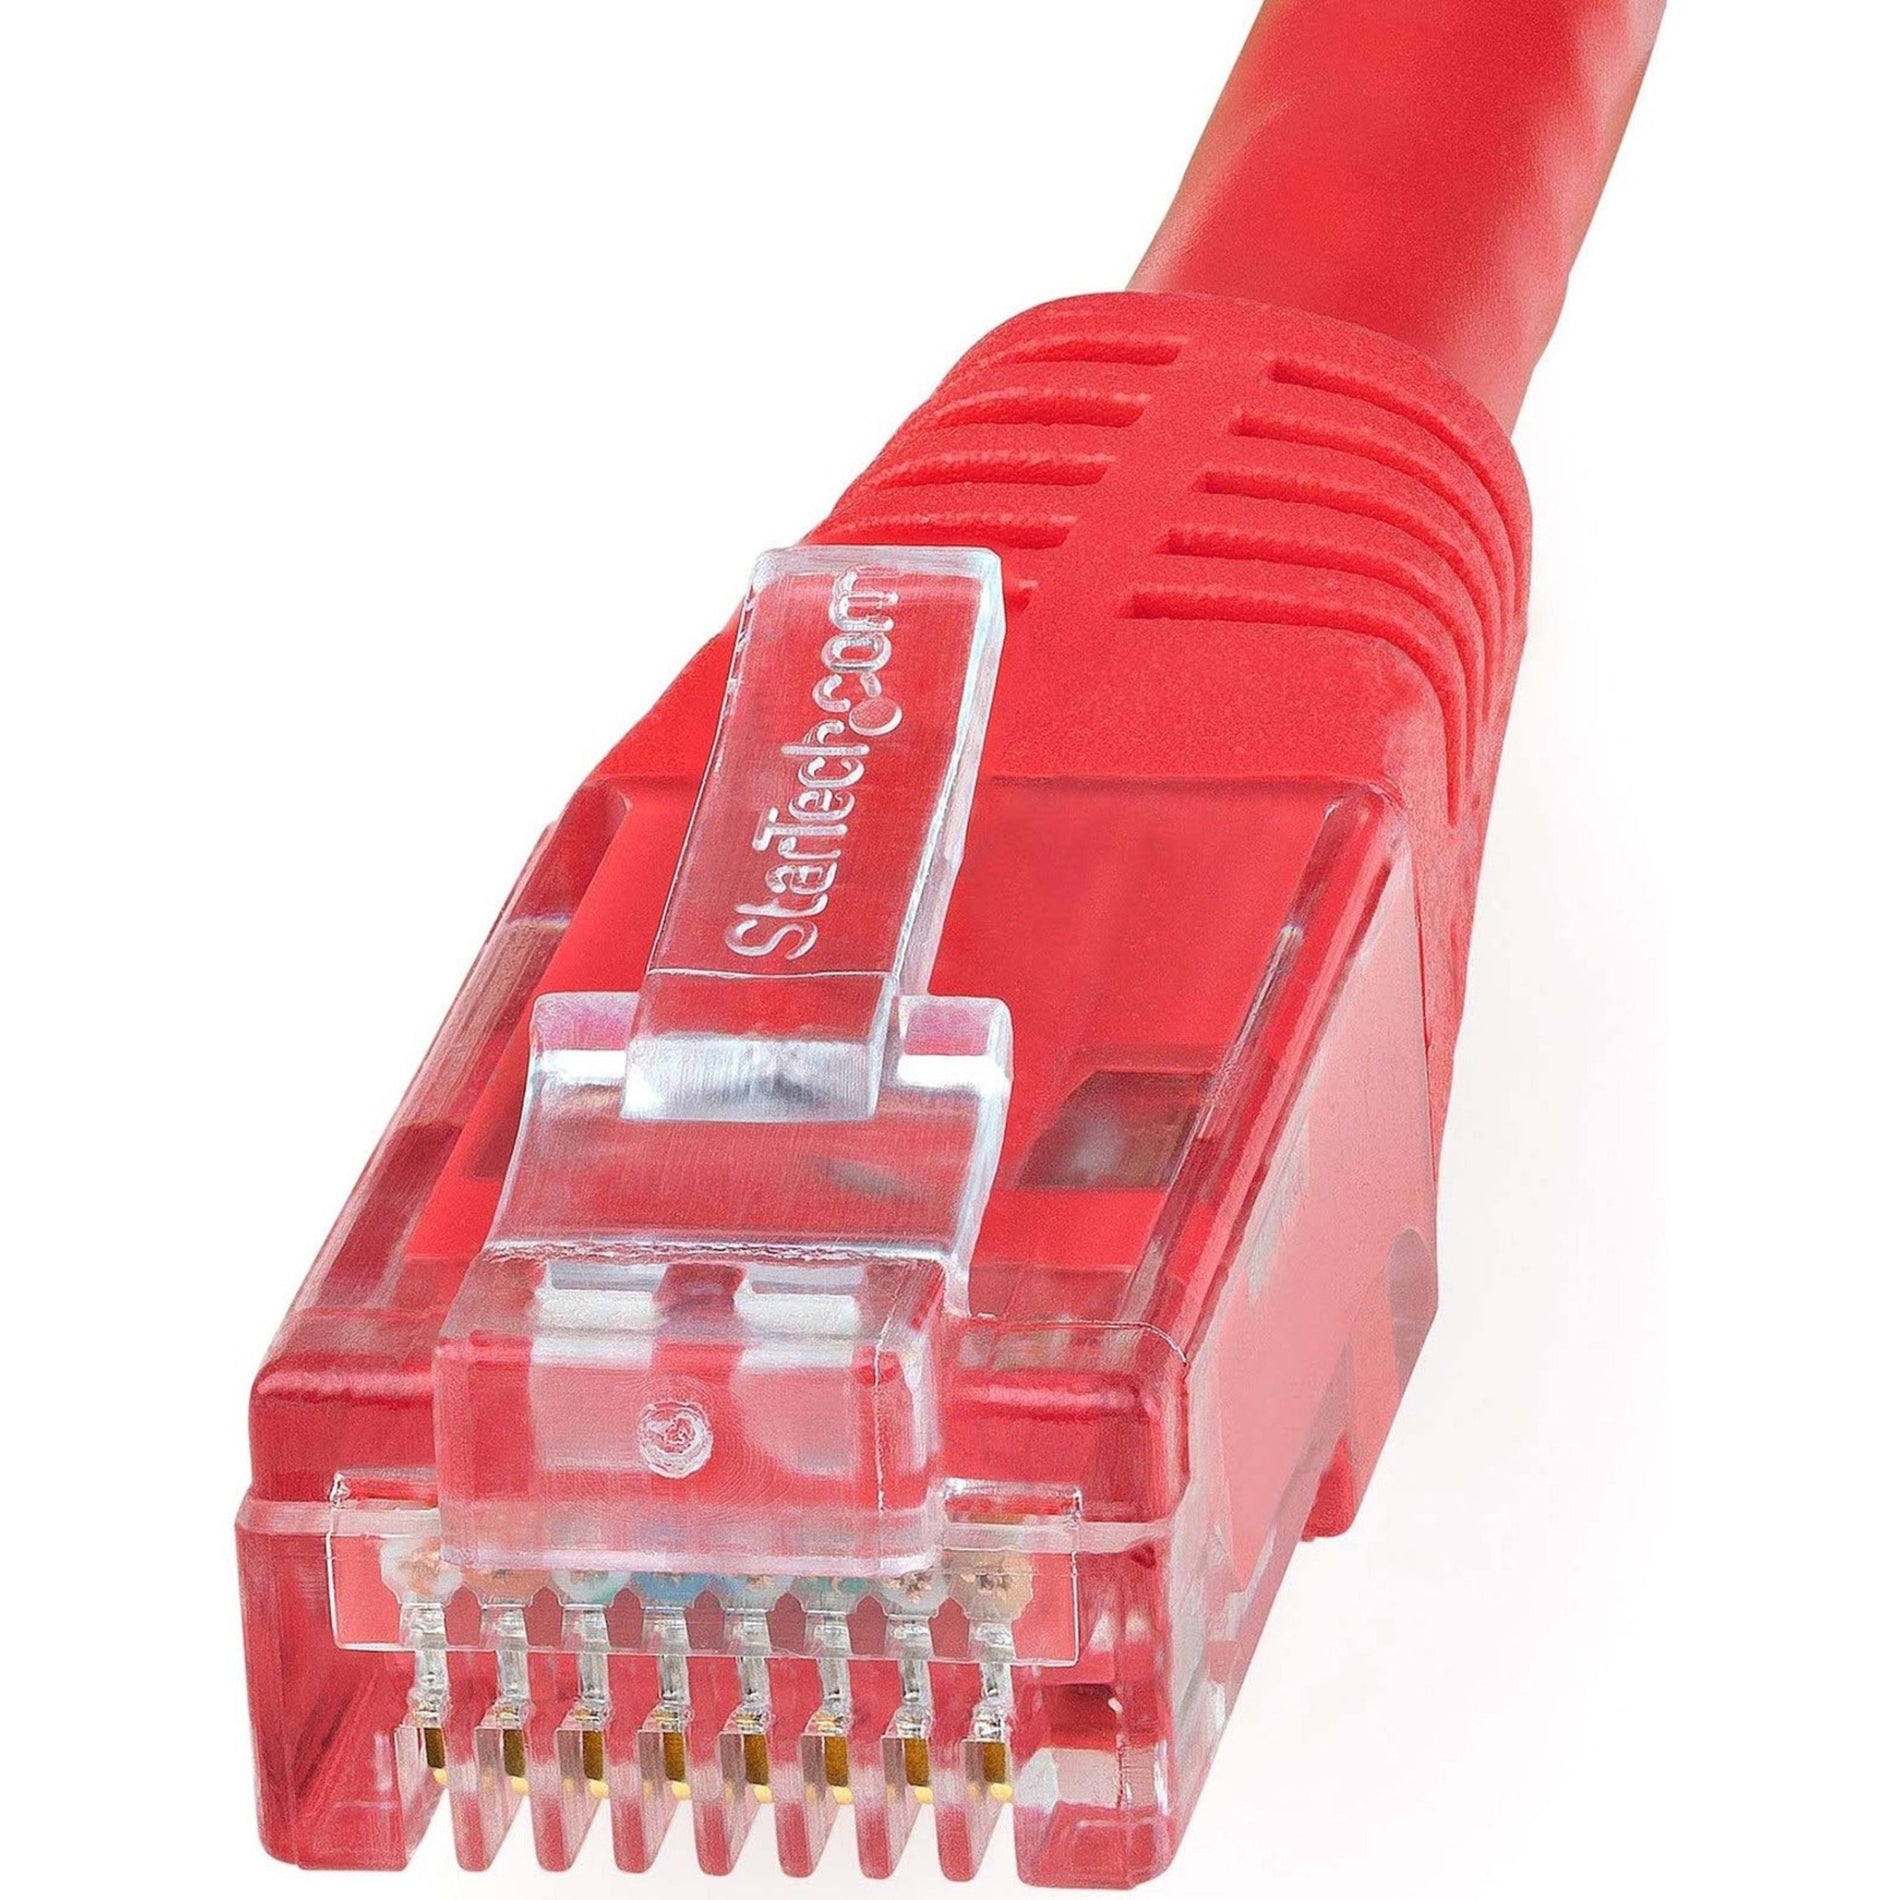 StarTech.com C6PATCH15RD 15ft Red Cat6 UTP Patch Cable ETL Verified, 10 Gbit/s Data Transfer Rate, Gold Plated Connectors